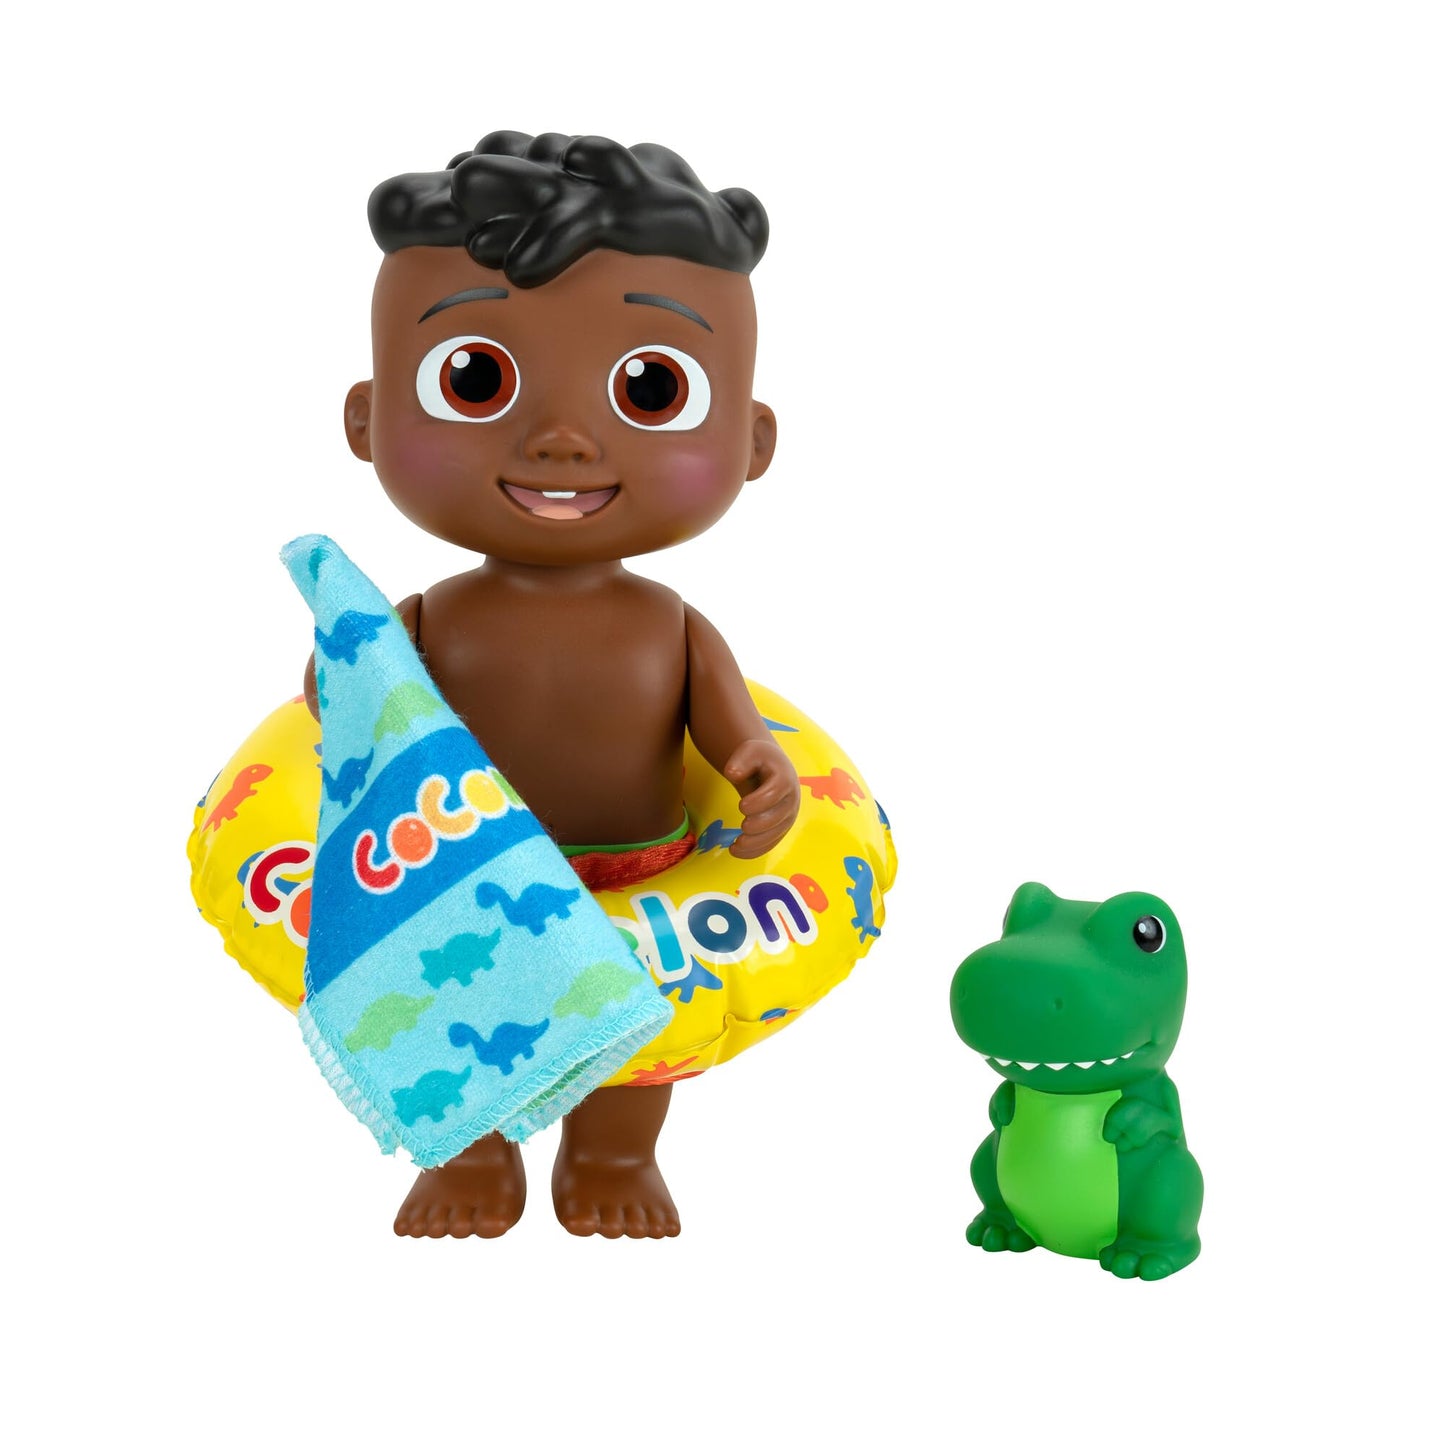 CoComelon - Splish Splash JJ Doll- with Shark Bath Squirter and Water Accessories Water Play - Toys for Kids and Preschoolers - Amazon Exclusive